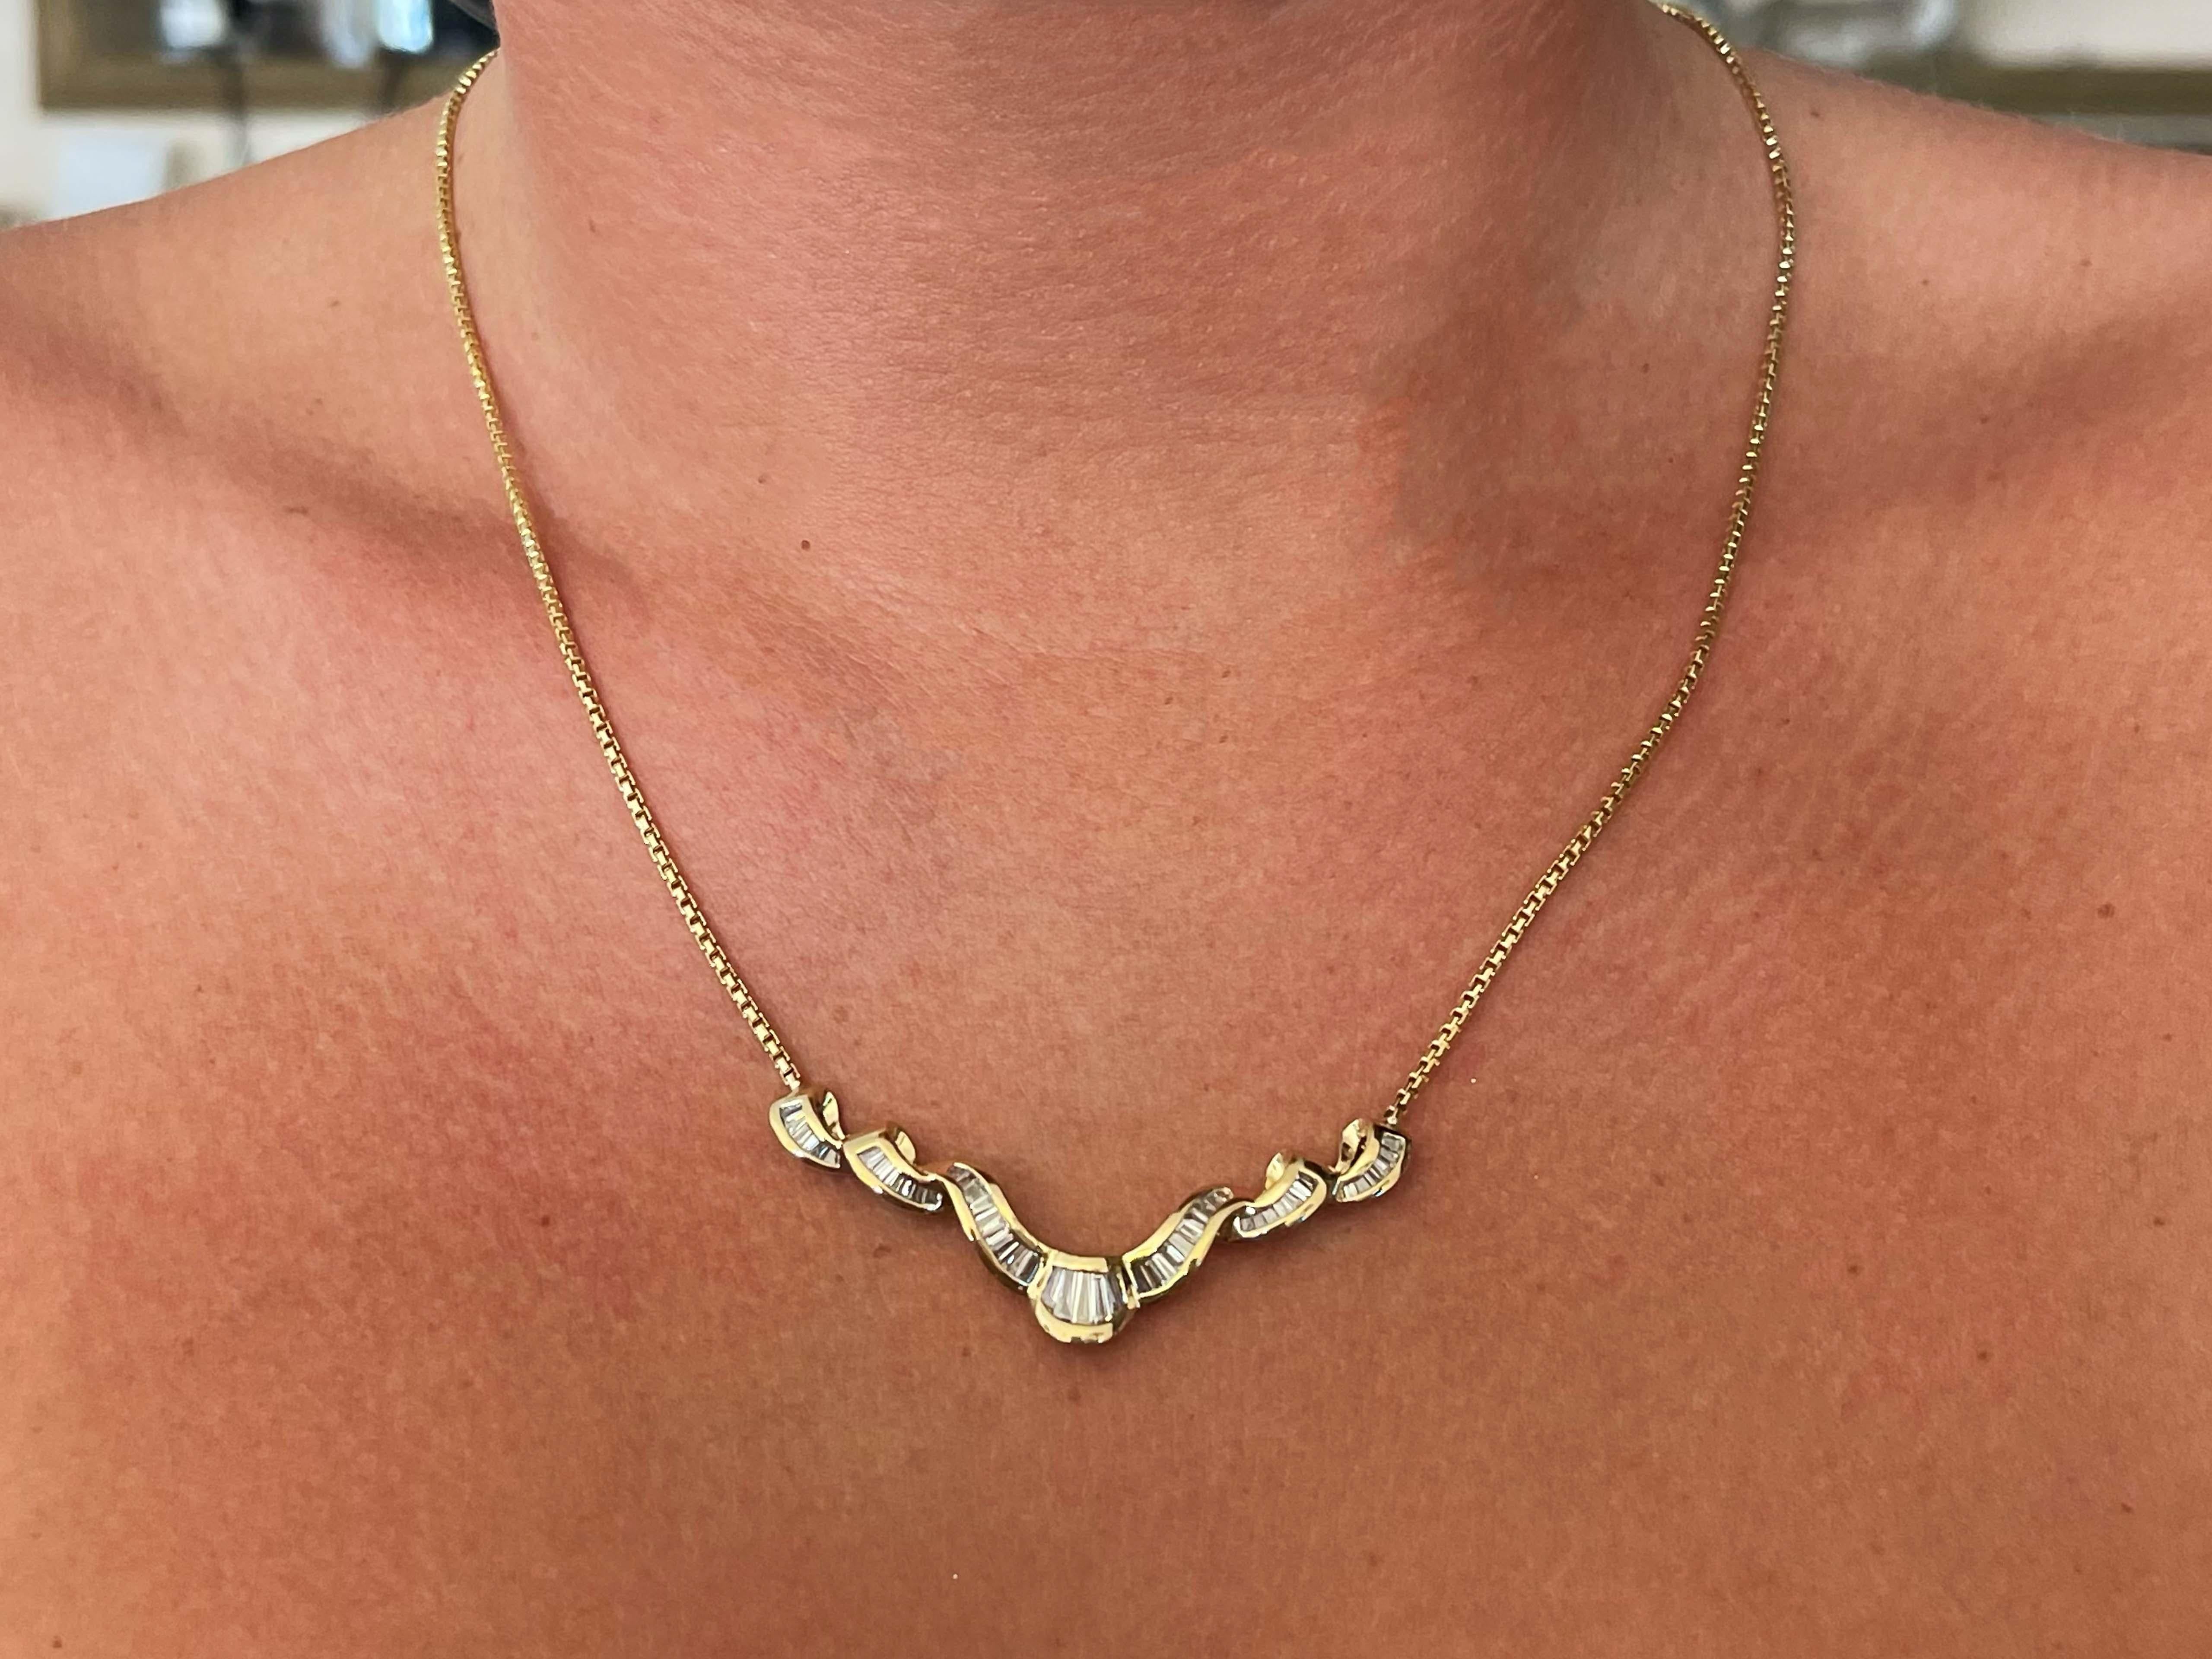 Item Specifications:

Necklace Metal: 18k Yellow Gold

Total Weight: 15.0 Grams

Chain Length: 20